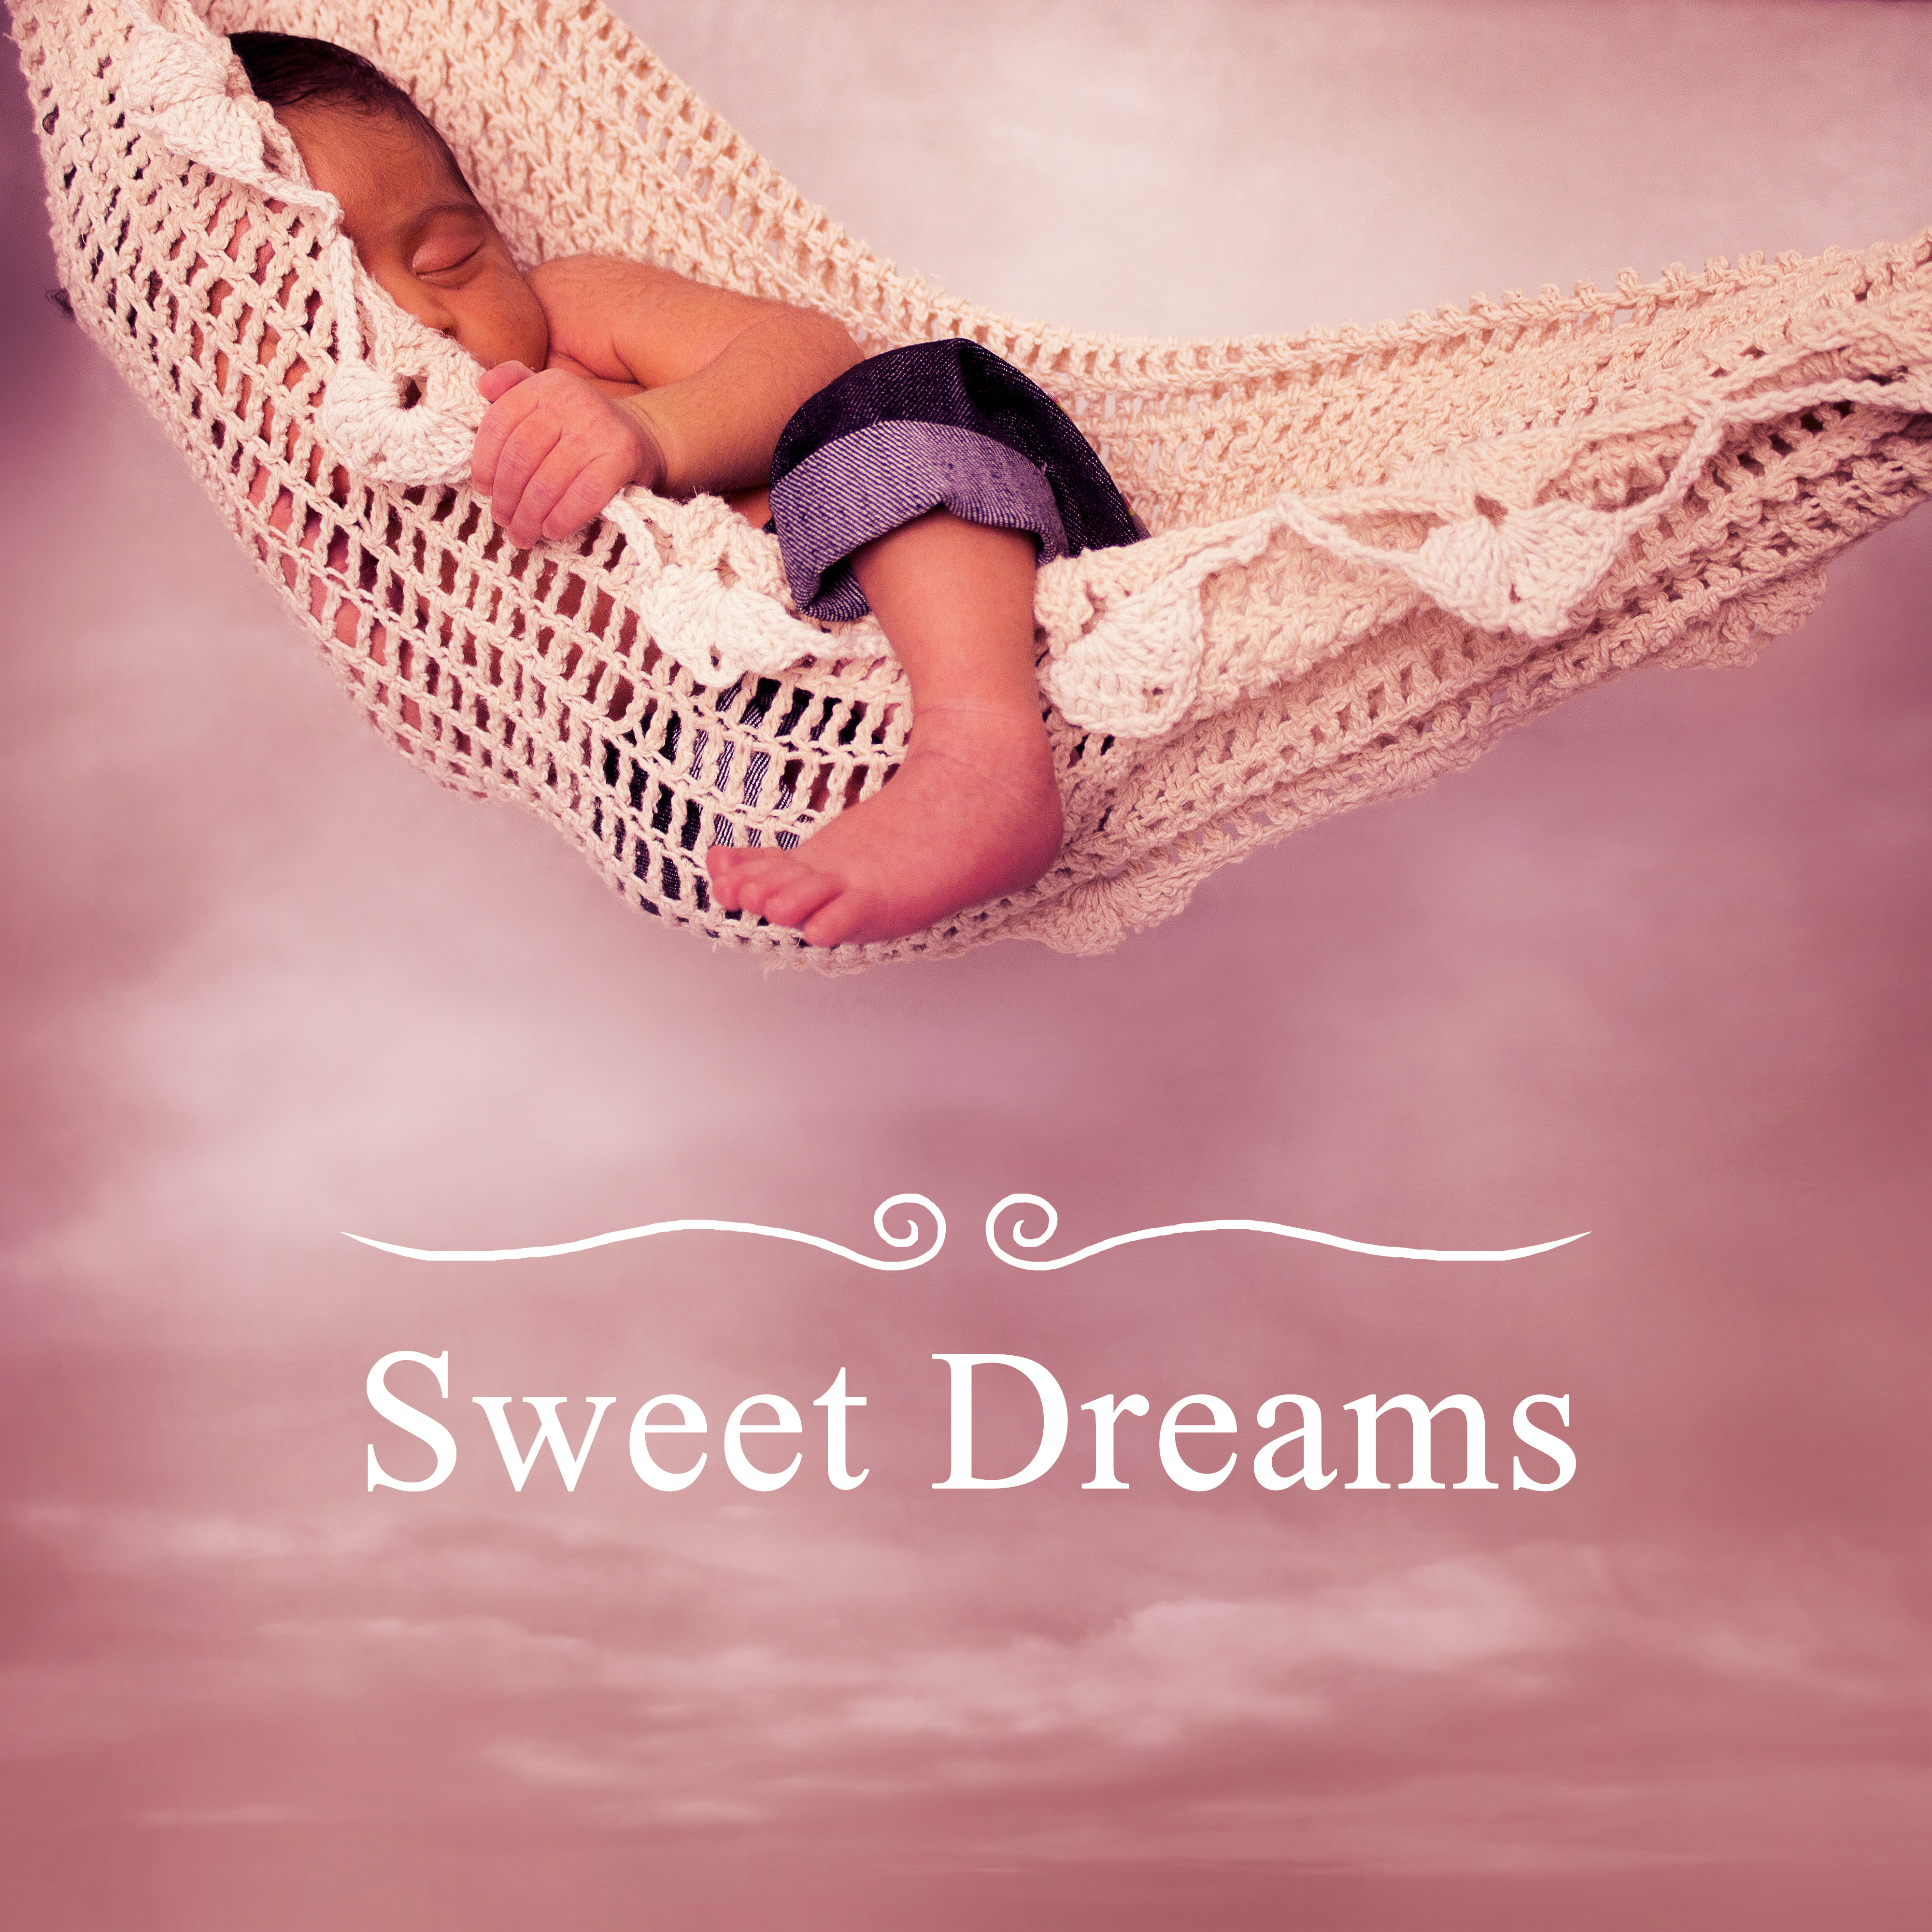 Sweet Dreams – Healing Lullaby for Baby, Restful Sleep, Relaxation, Classical Music at Goodnight